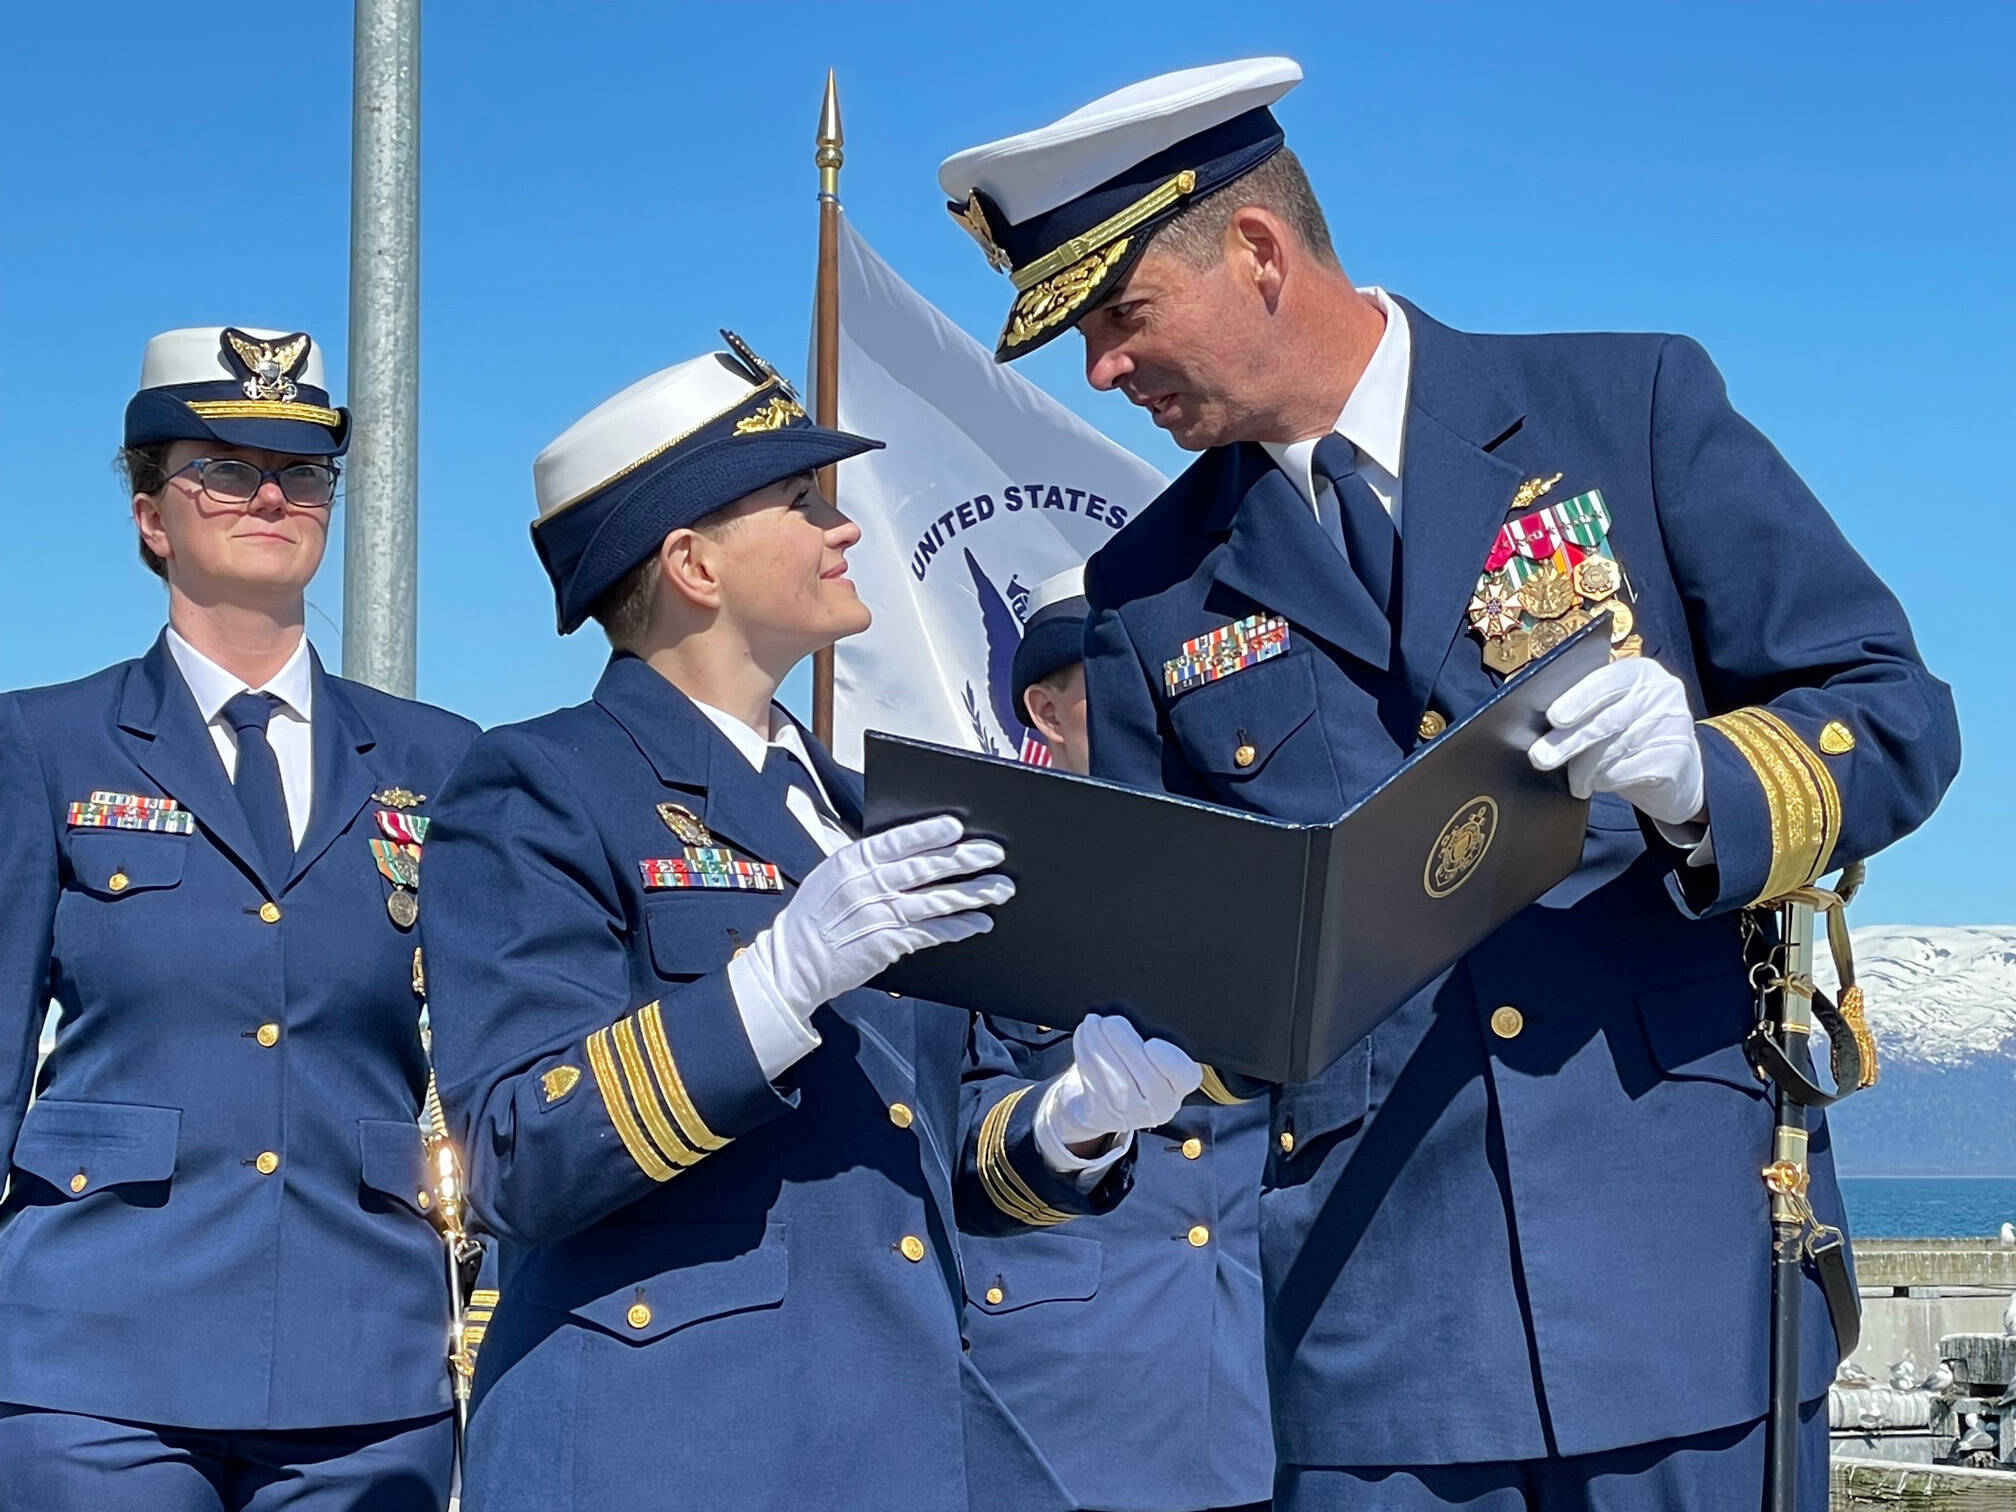 At the May 19, 2022, change of command ceremony in Homer, Alaska, Commander Jeannette Greene, outgoing captain of the USCGC Hickory (left) is presented with the Coast Guard Commendation Medal by Rear Admiral Nathan A. Moore, Seventeenth District Commander, United States Coast Guard. (Photo by McKibben Jackinsky)